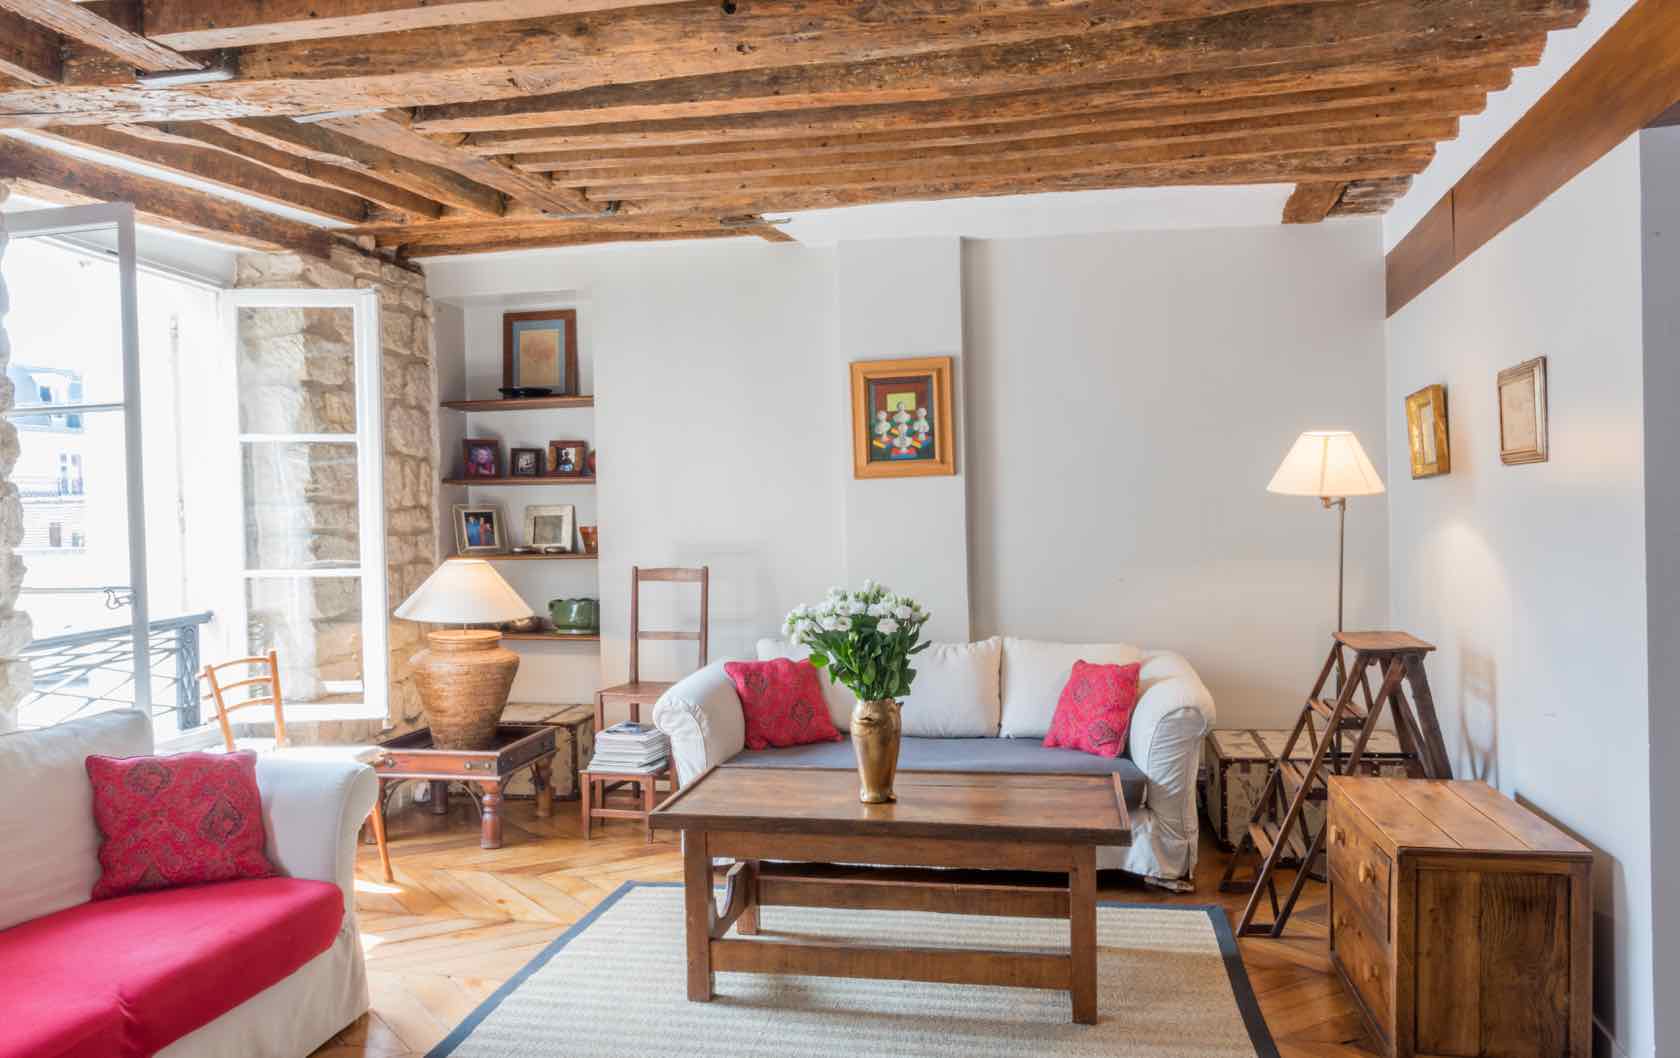 The Dolcetto Apartment - Old-World Comfort in Saint-Germain-des-Près